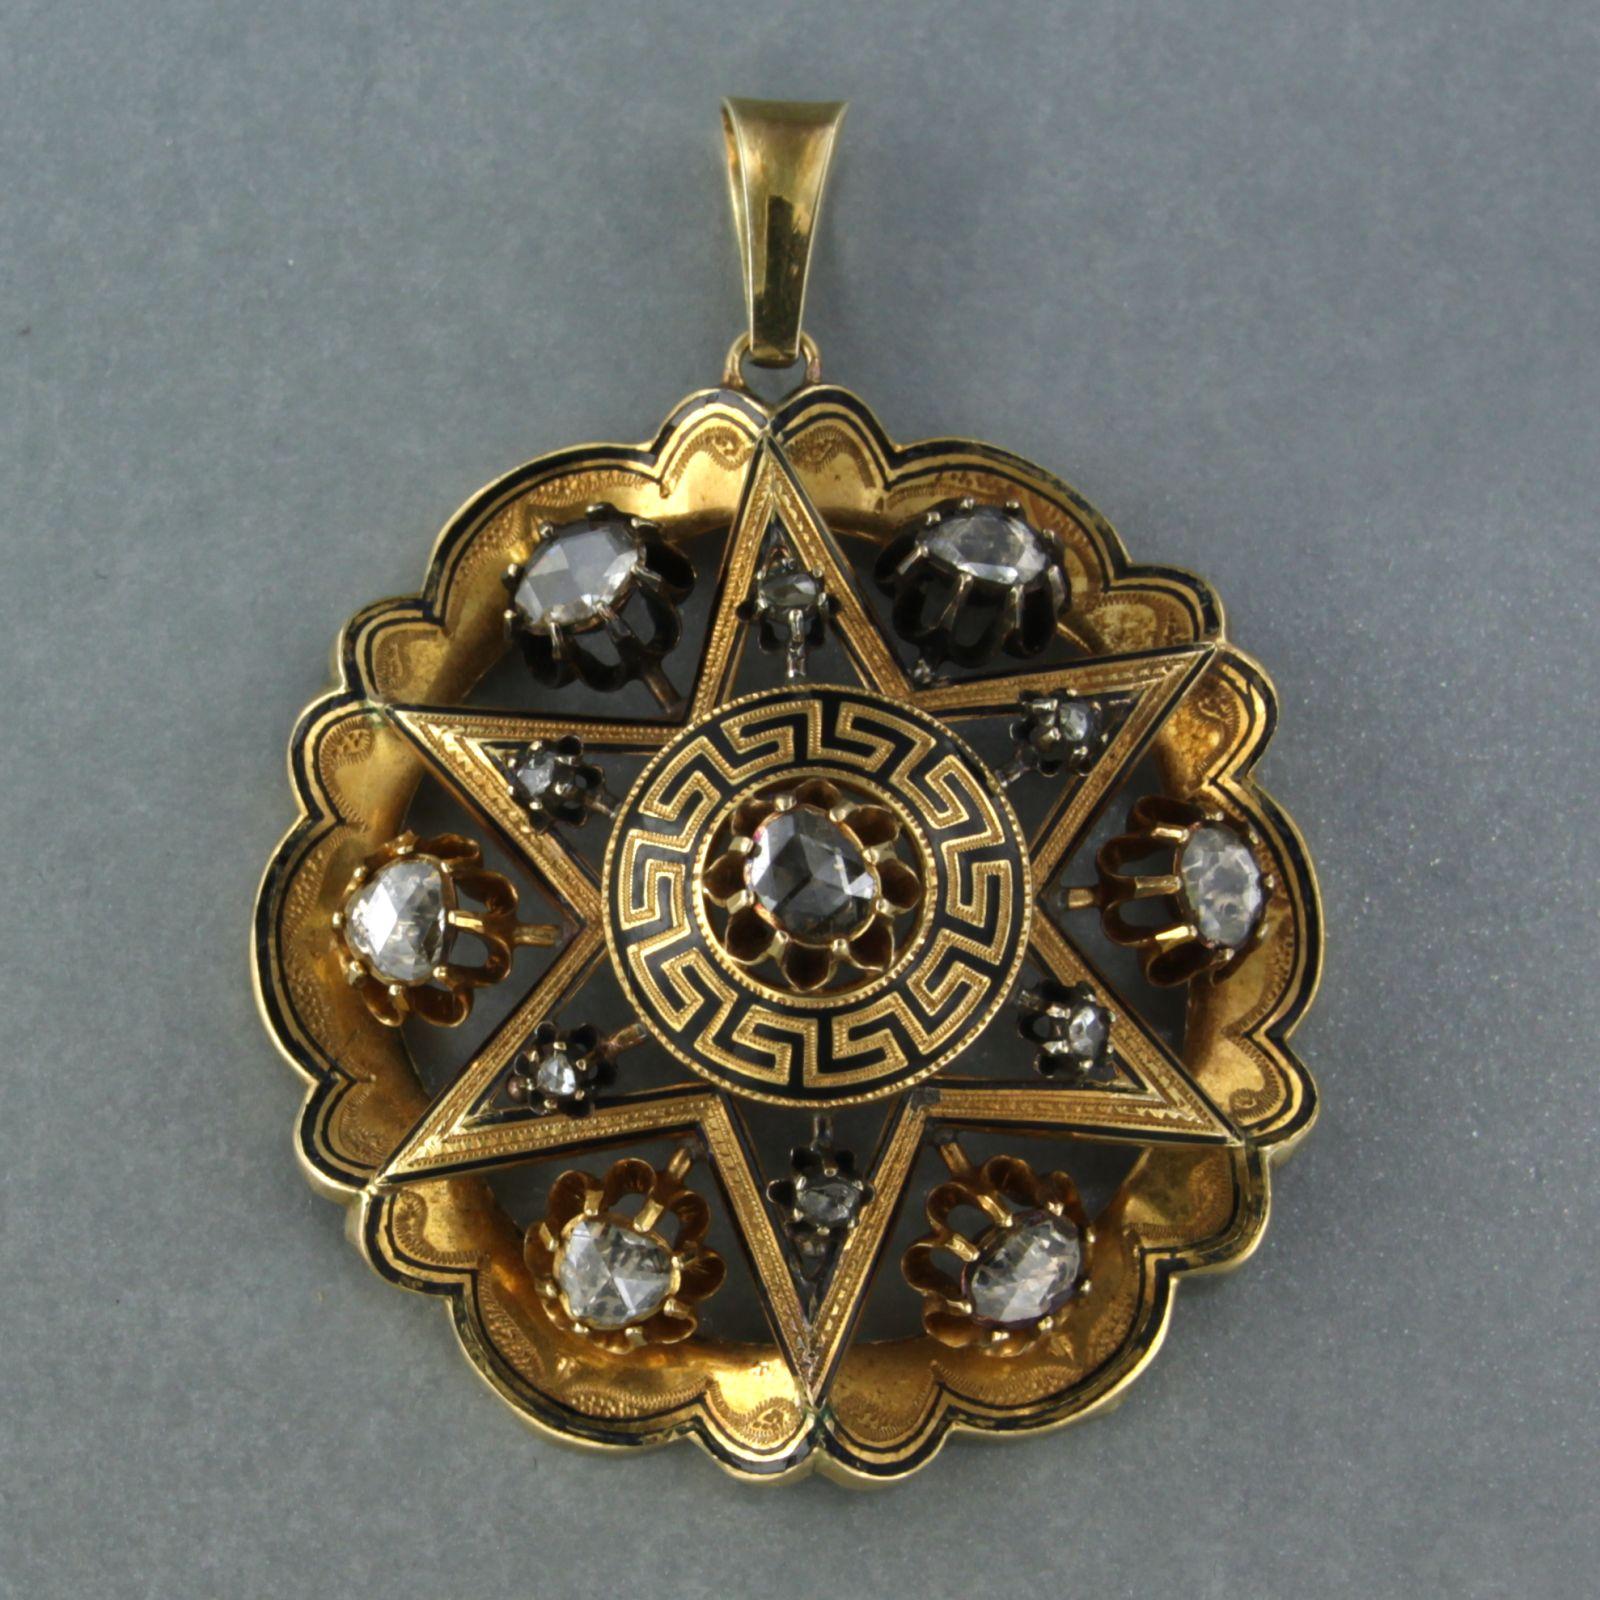 18k gold pendant with black enamel and diamonds 

 detailed description:

The pendant has a diameter of 4.1 cm

weight: 12.1 grams

set with

- 7 x 4.5 mm rose cut diamonds, total approx. 0.45 ct

colour : G/H
clarity : SI

- 6 x 1.8 mm rose cut